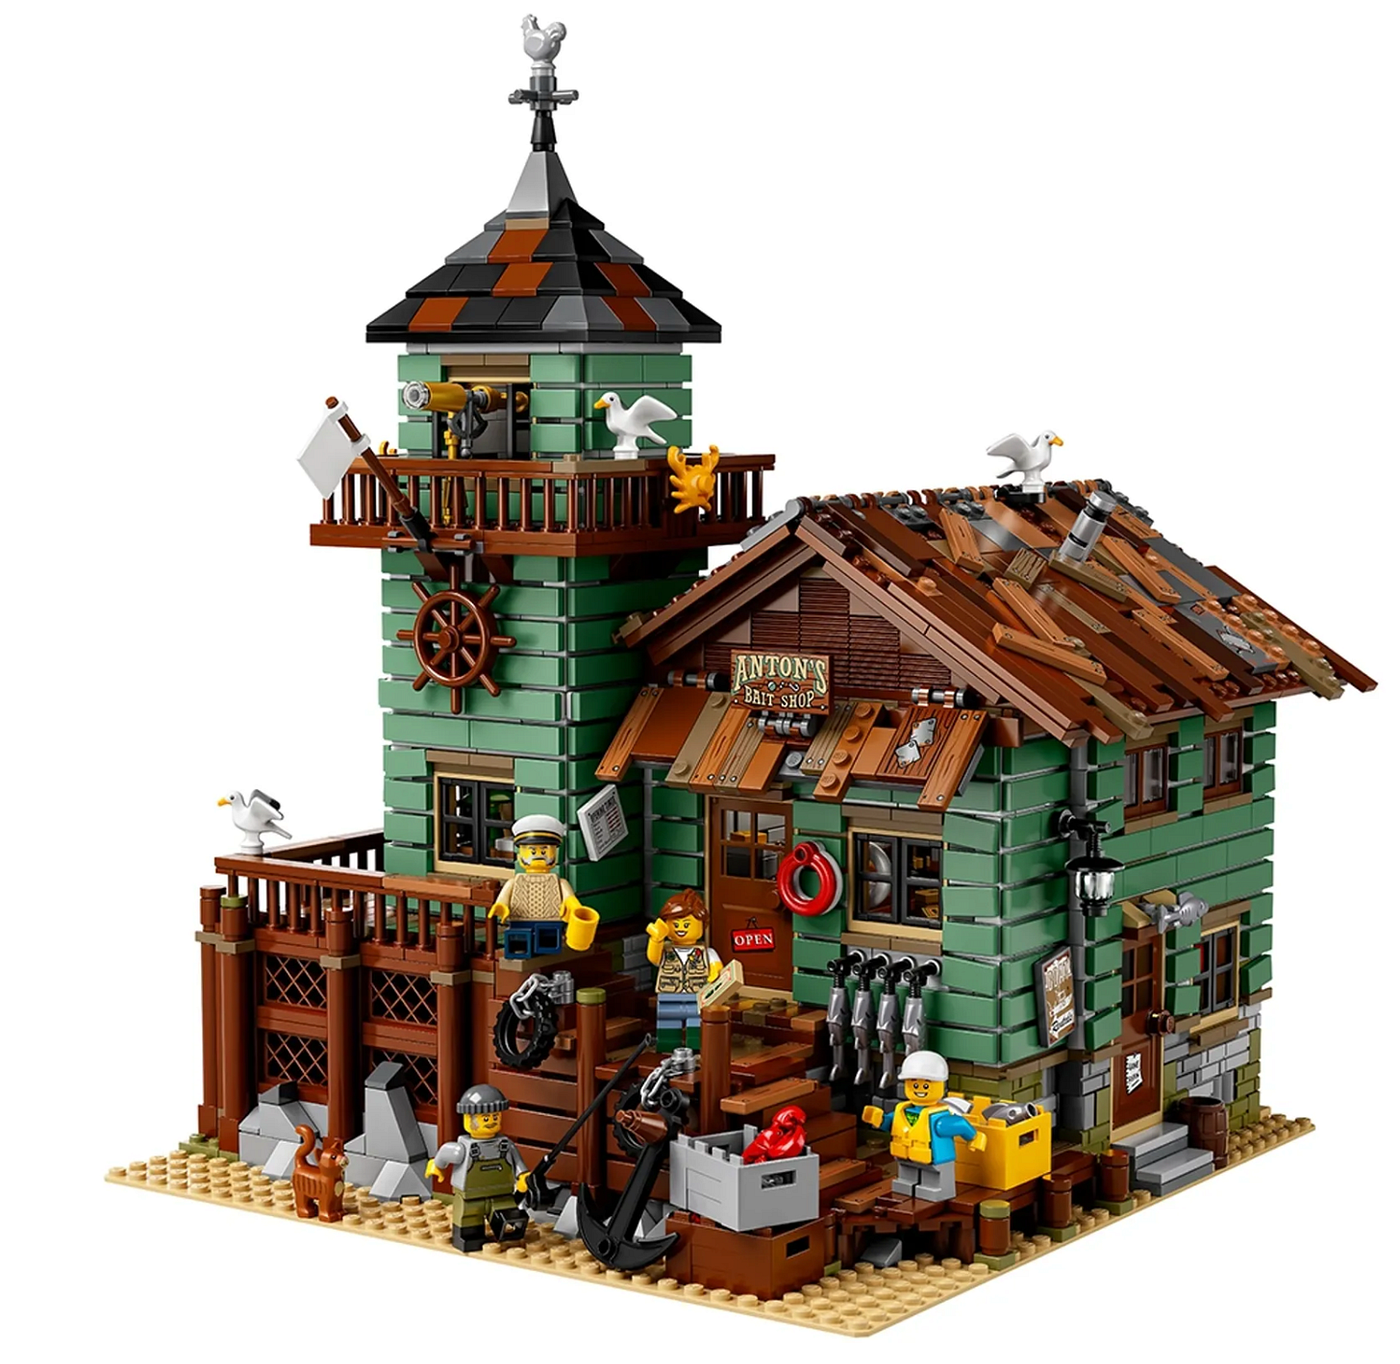 I Built My First Lego Set at 36 Years Old | by Justin Davis | Medium